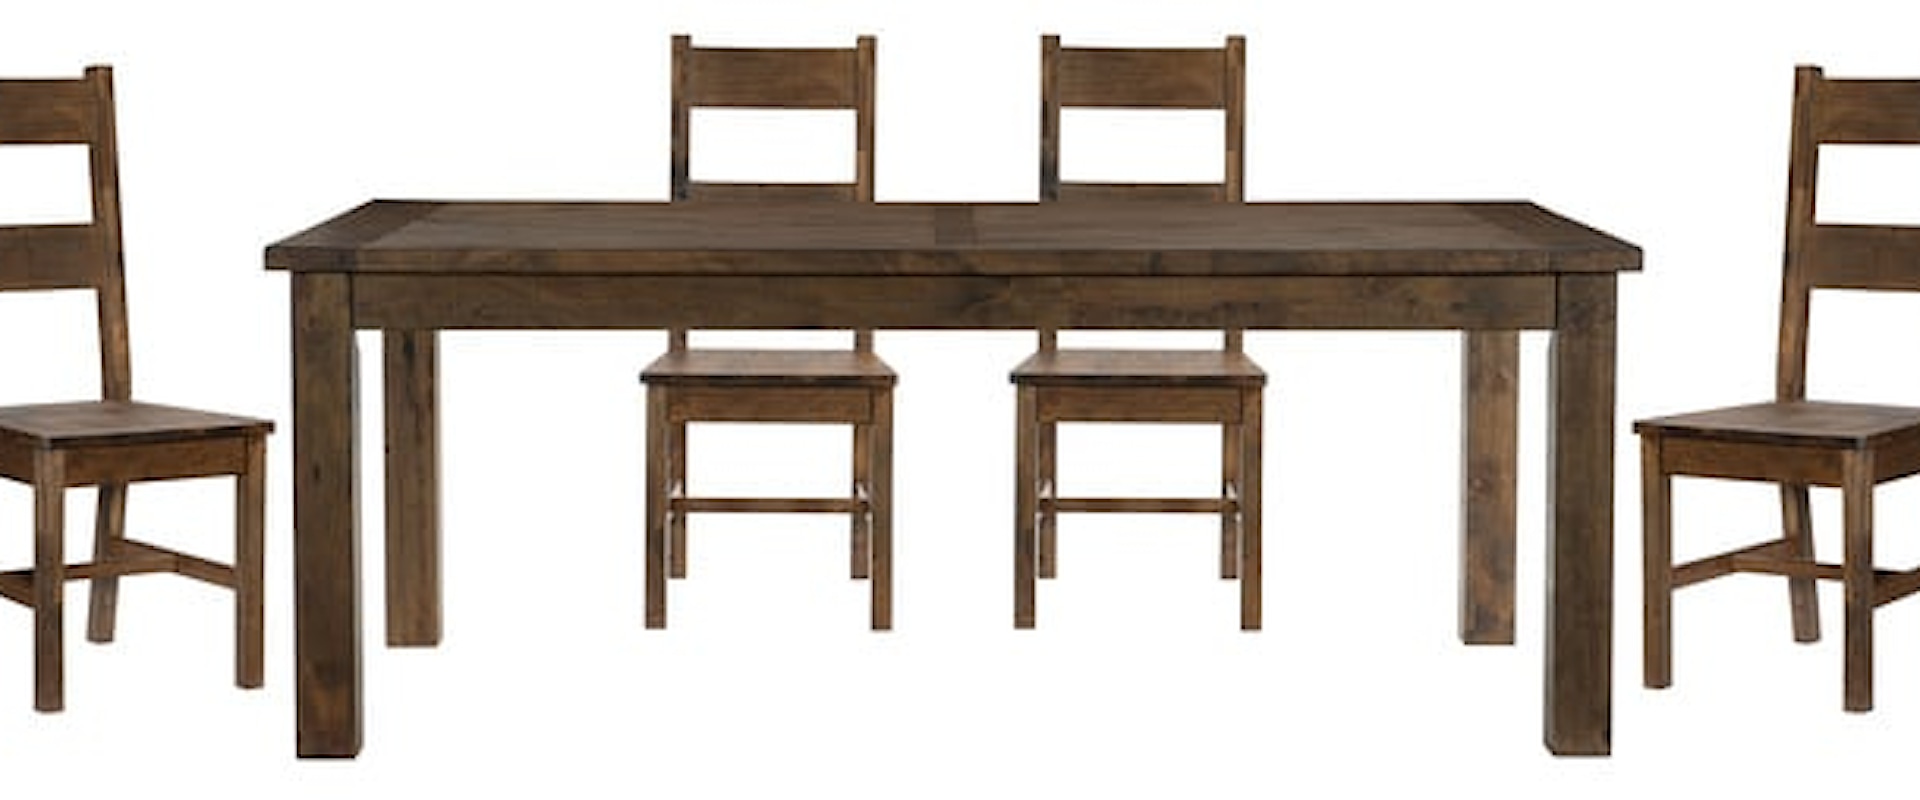 Rustic 5-Piece Dining Set with Ladder Backs